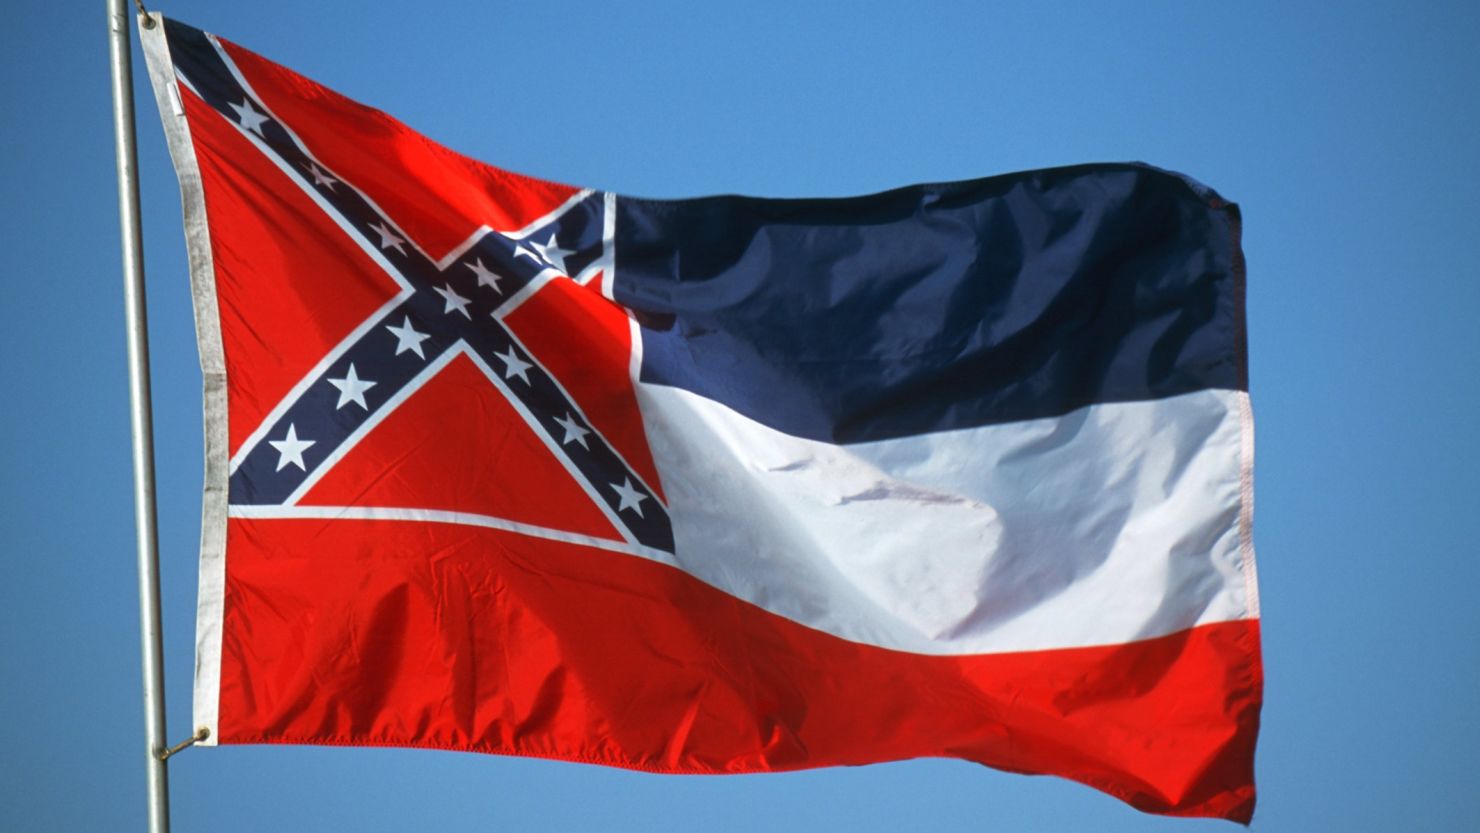 Mississippi's current flag was adopted by the Mississippi Legislature in 1894. 